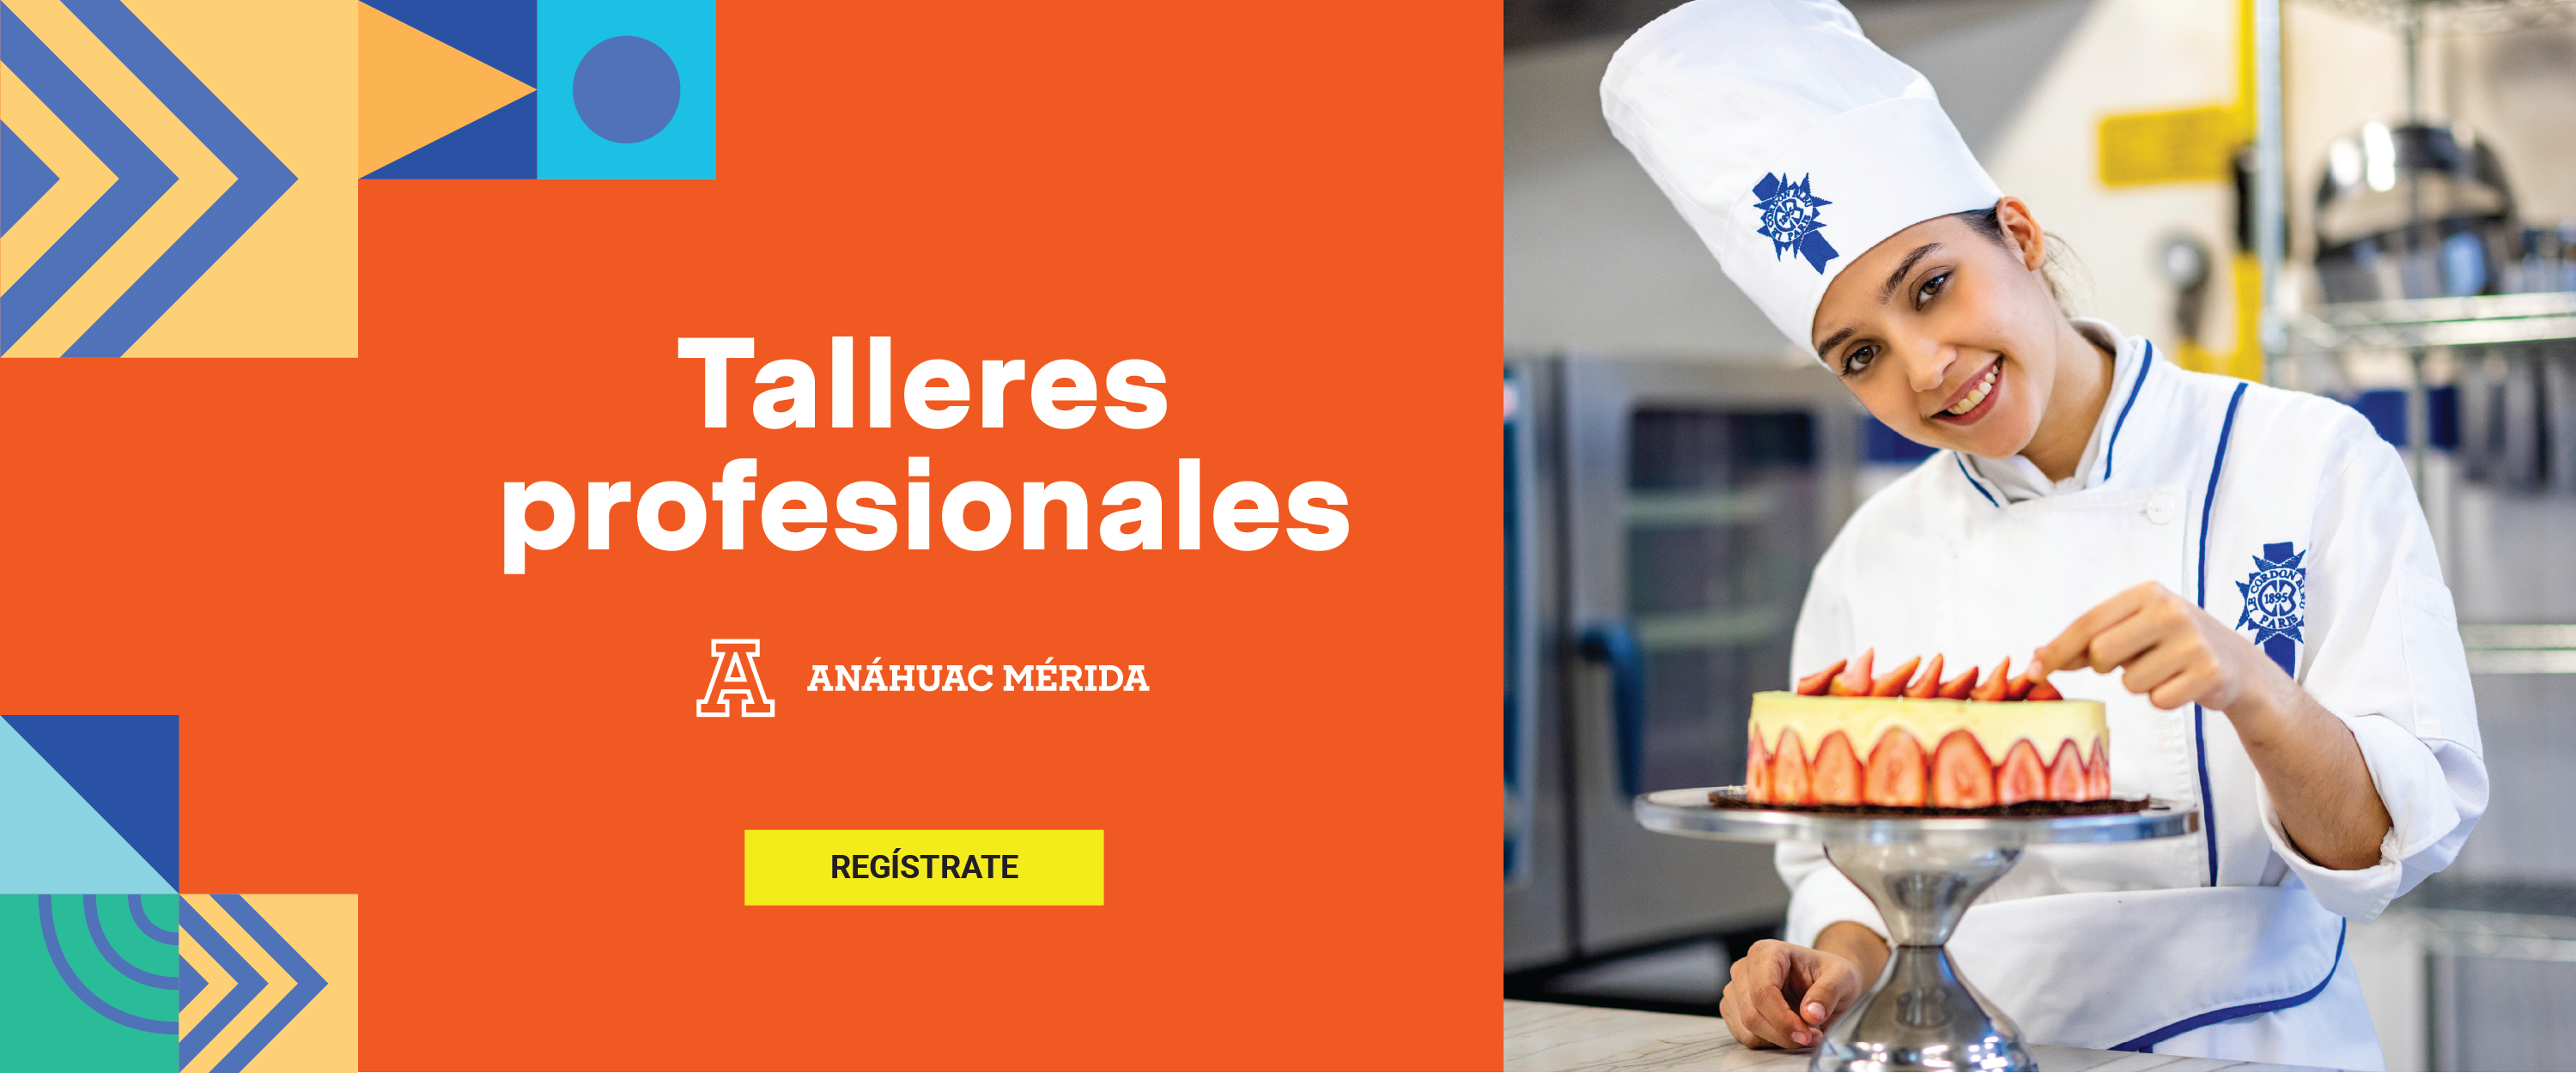 Talleres profesionales